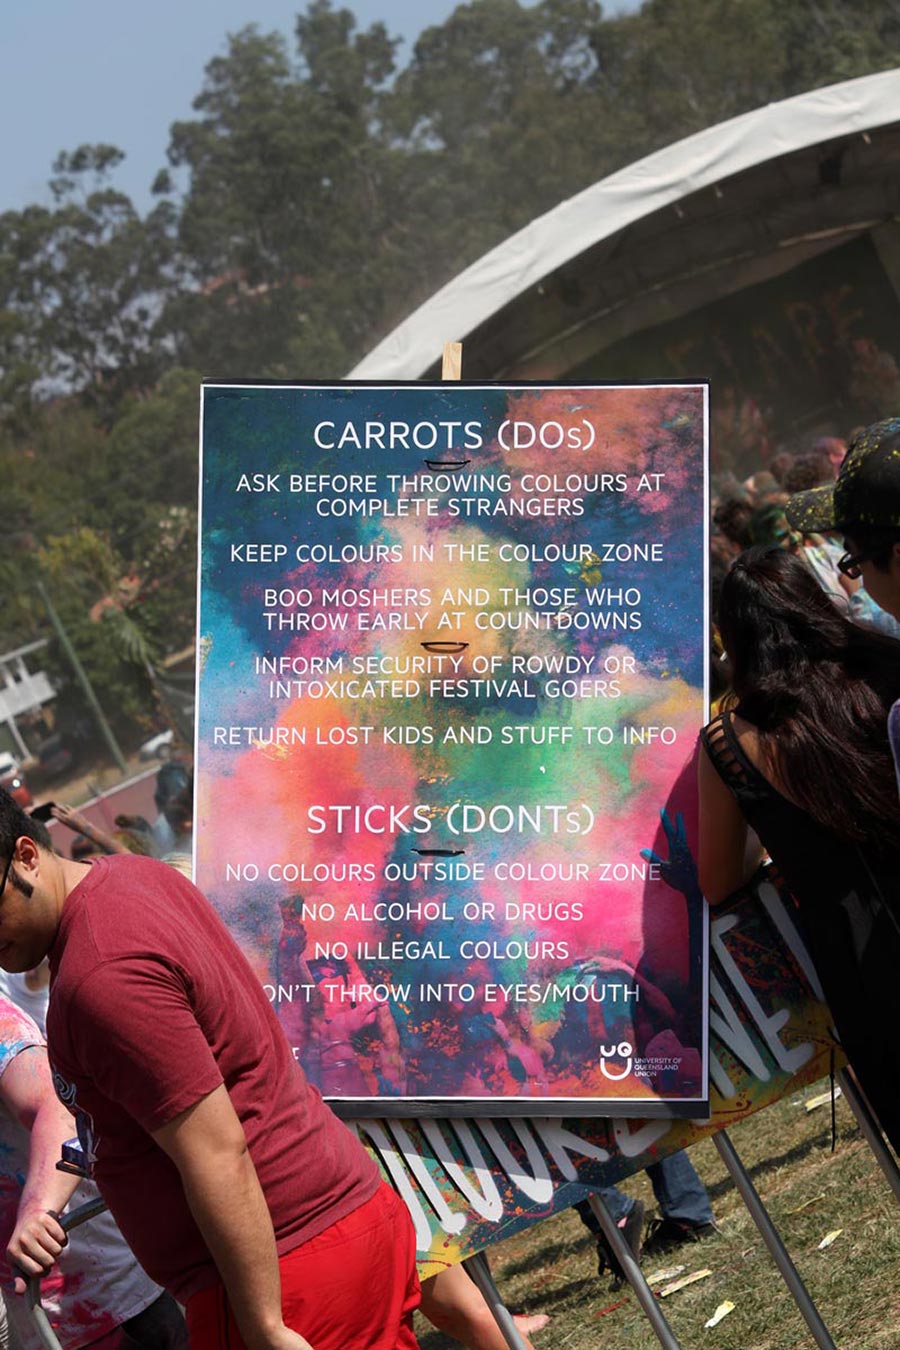 The rules at SpringFlare Festival of Colours